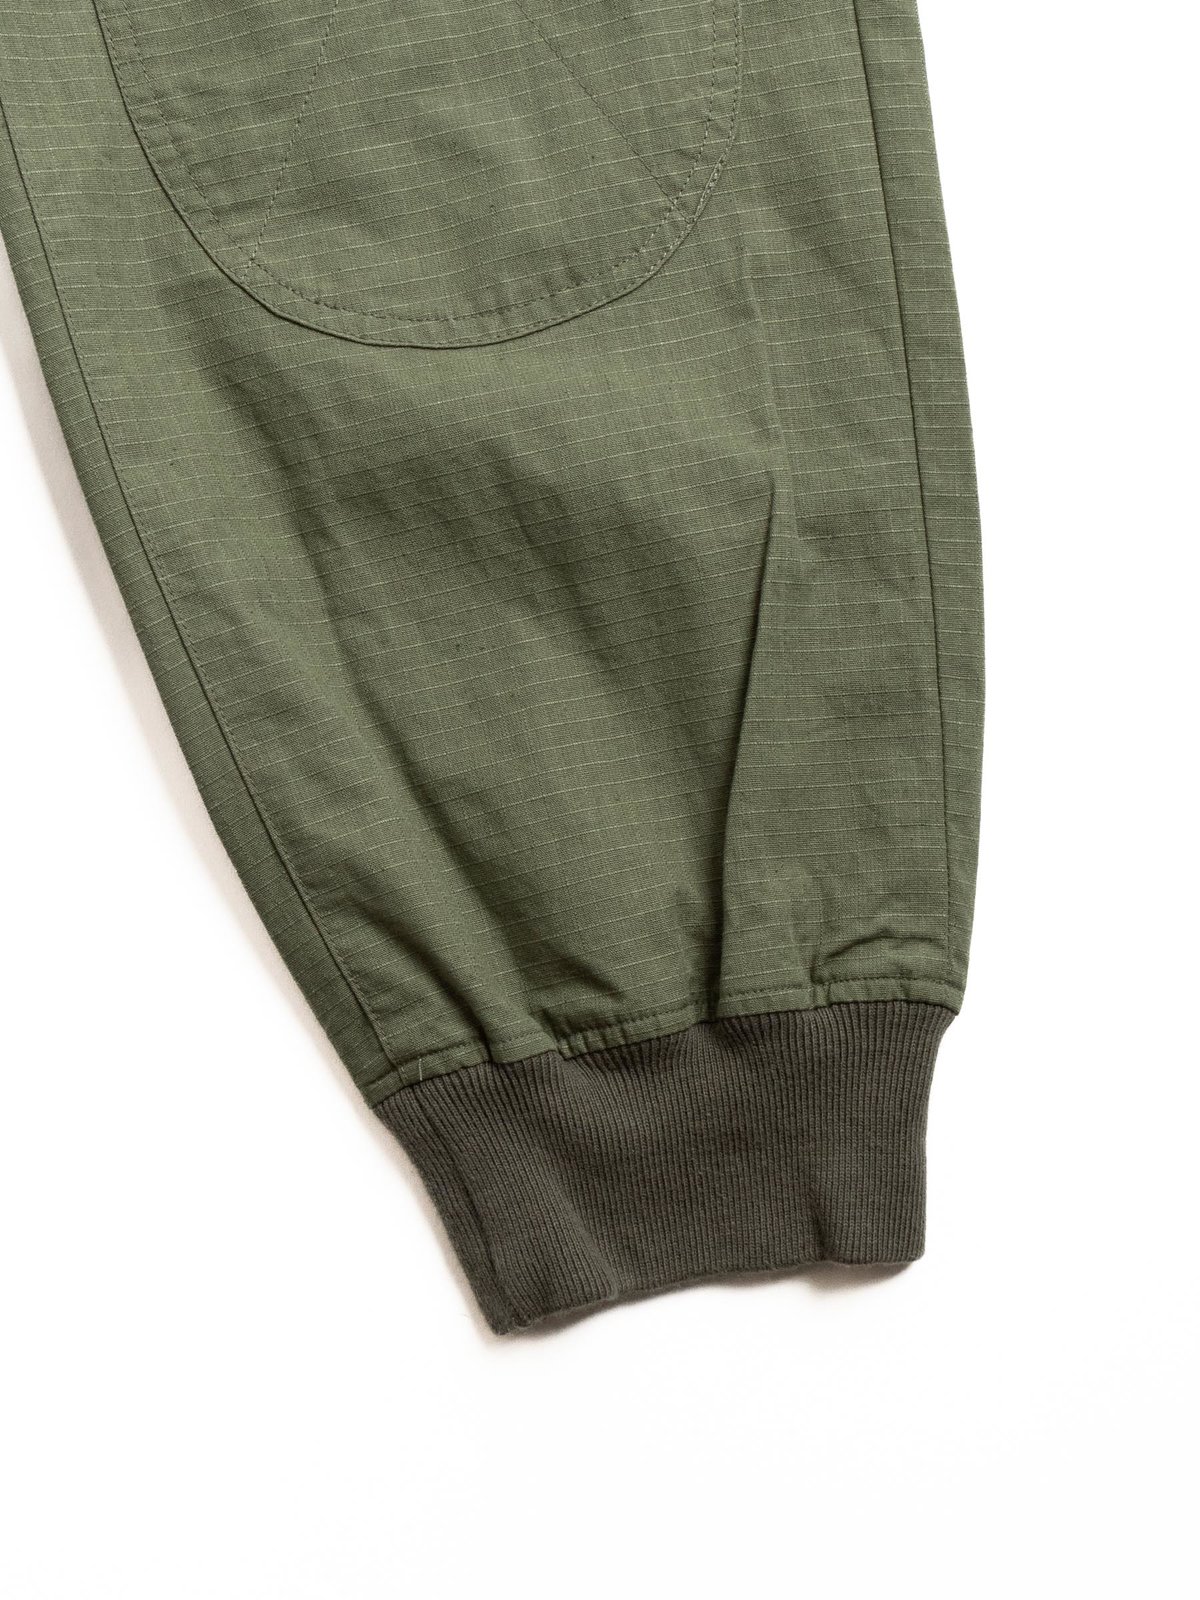 AIRBORNE PANT OLIVE COTTON RIPSTOP - Image 4